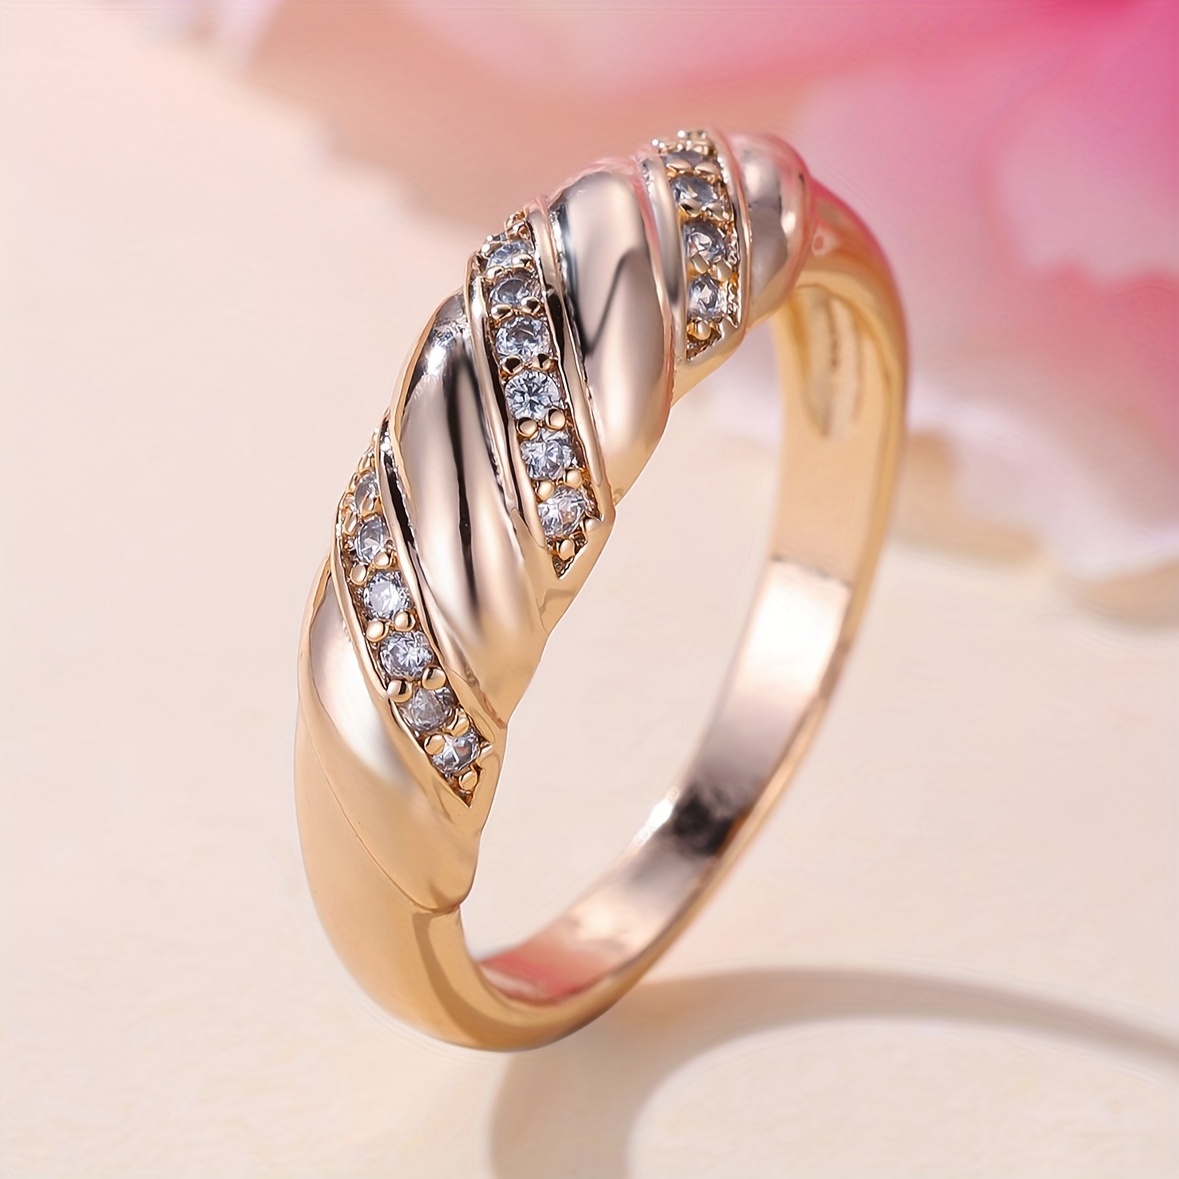 

Chic Croissant Ring Paved Shining Zirconia Symbol Of Beauty And Nobility Match Daily Outfits Perfect Party Accessory Gift For Your Love